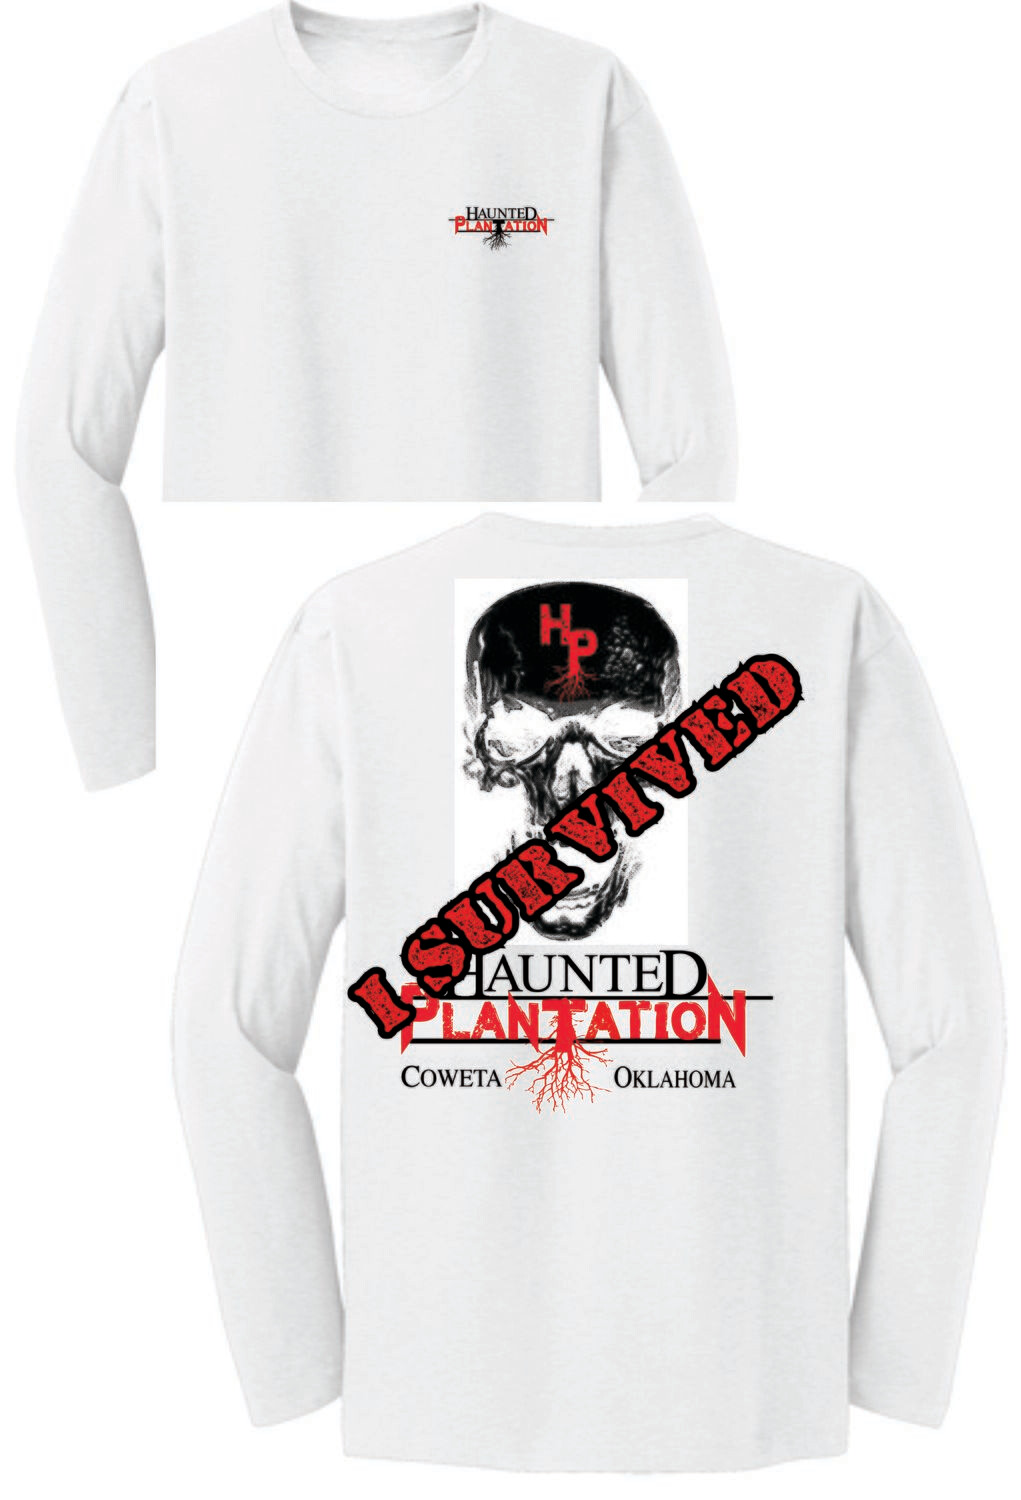 HAUNTED PLANTATION ~
DT6200 - District ® Very Important Tee ® LONG SLEEVE